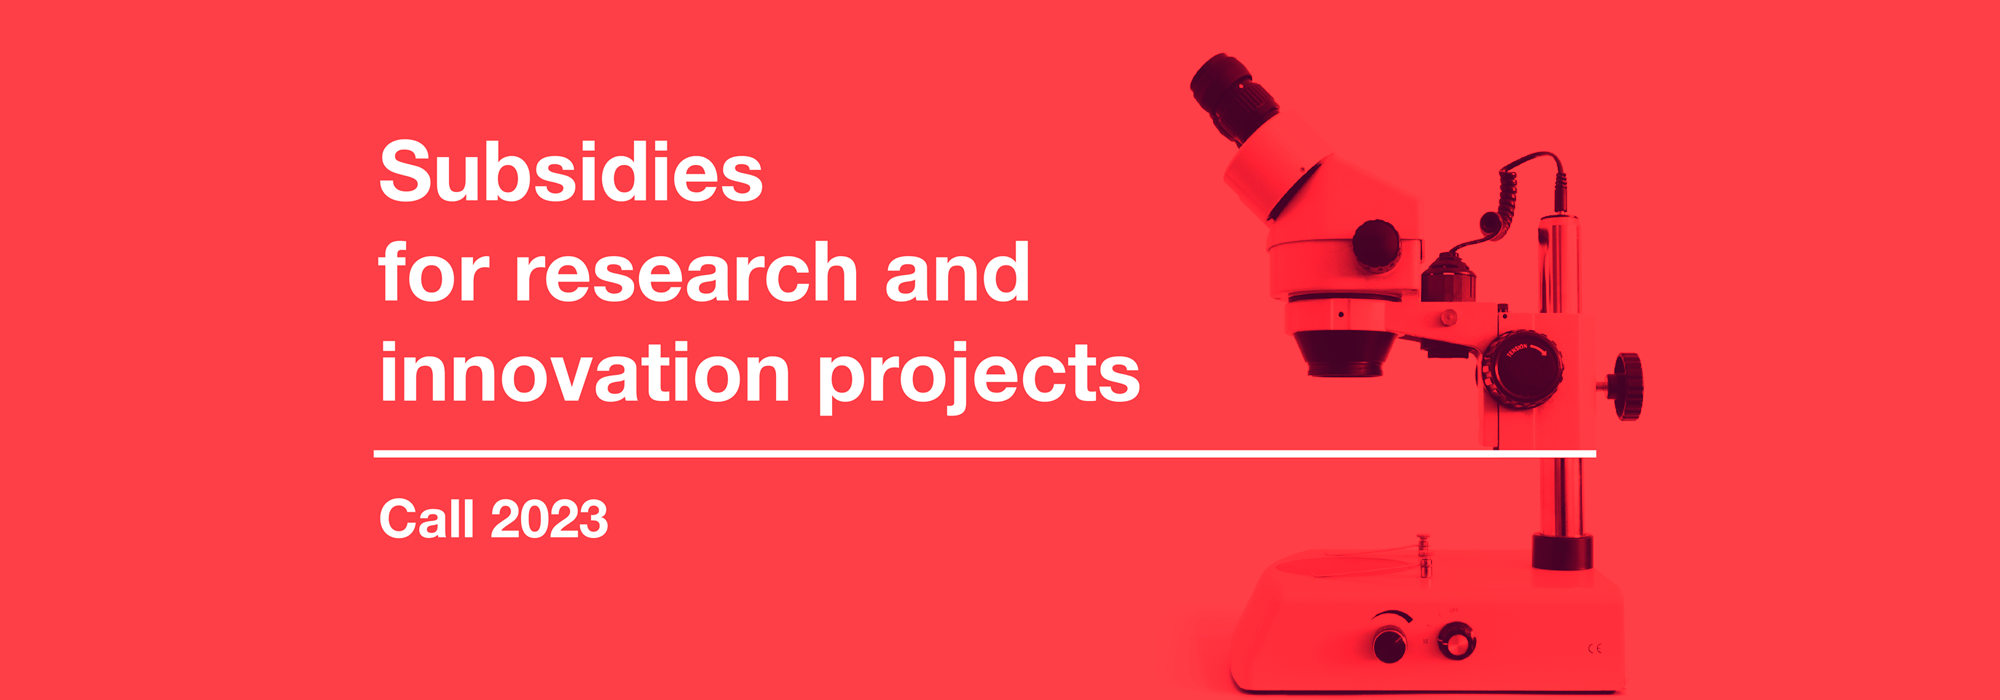 Grants for scientific research and innovation projects